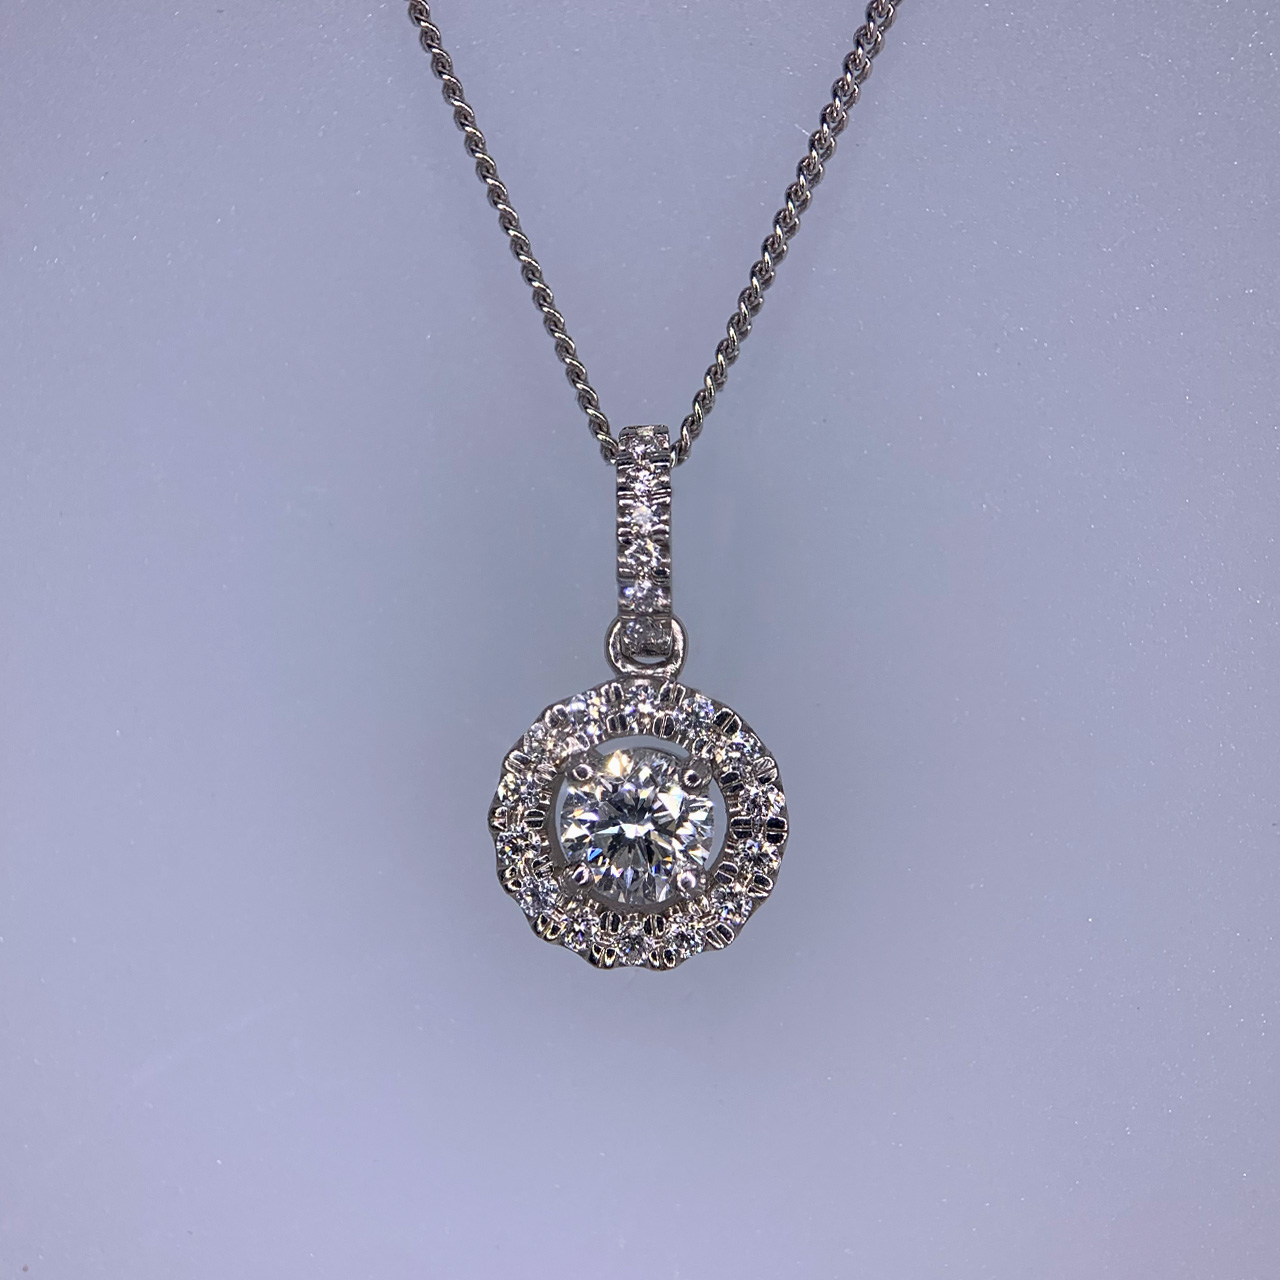 Diamond Cluster Pendant in 950 Platinum. The pendant holds 0.41 carat of diamond, with 14 smaller surrounding diamonds, the pendant measures approximately 9mm x 9mm. The pendant loop is 6mm and holds six smaller diamonds. All stones are claw set. 